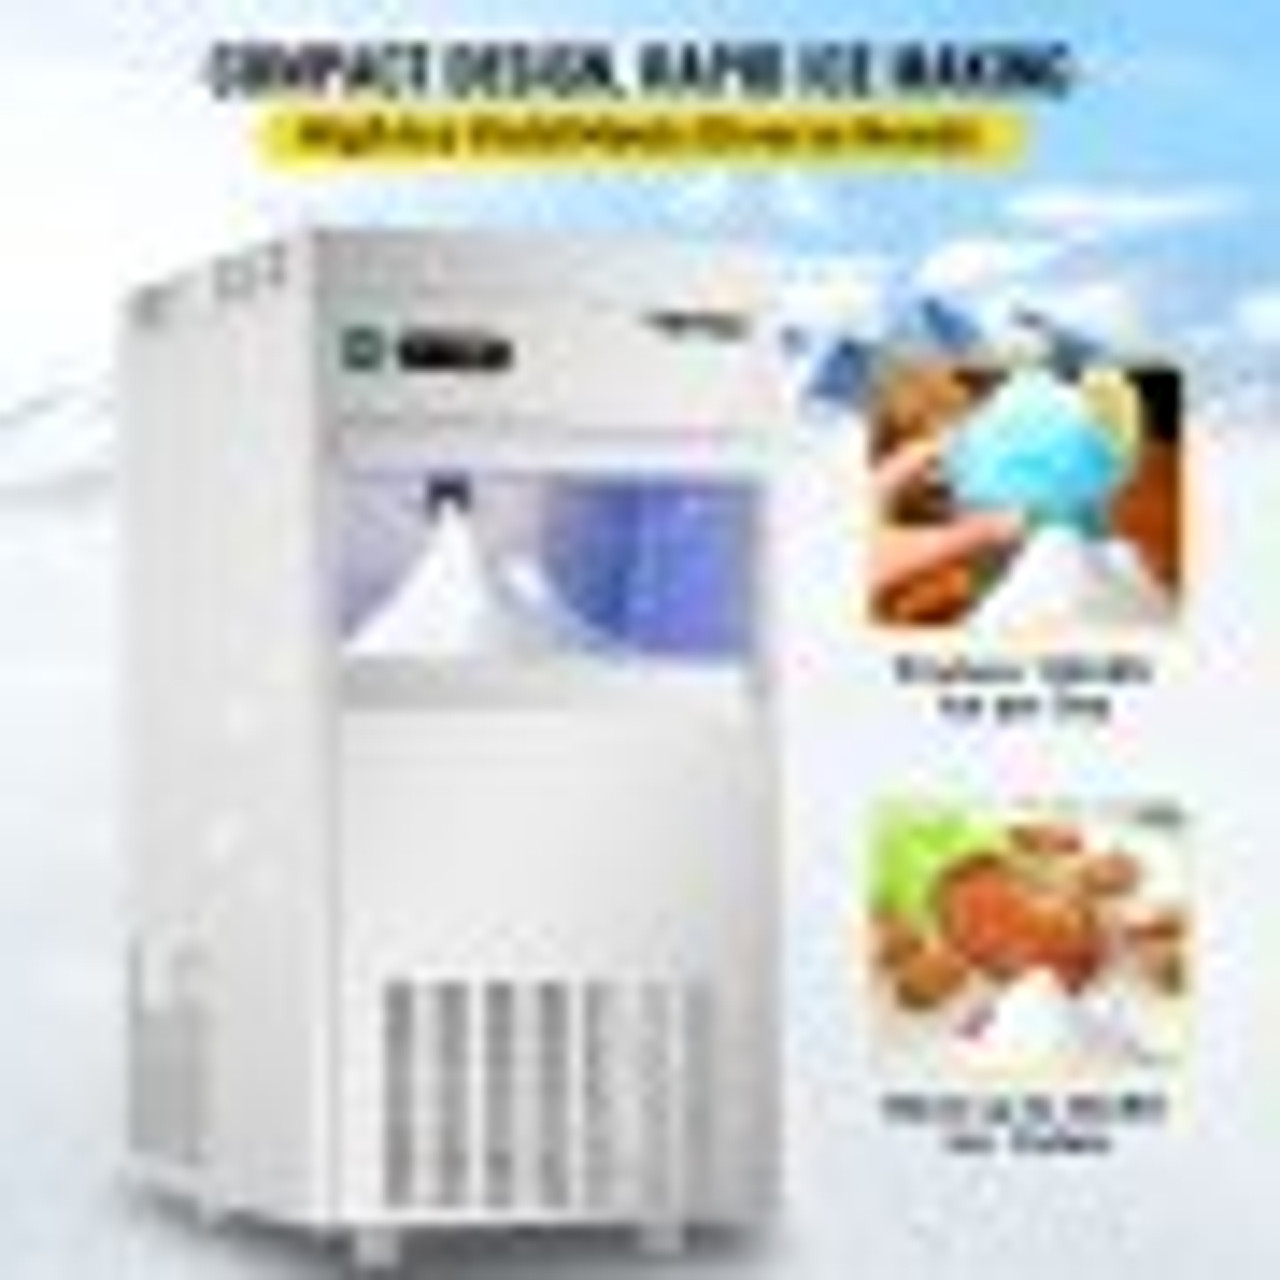 110V Commercial Snowflake Ice Maker 132LBS/24H, ETL Approved Food Grade Stainless Steel Flake Ice Machine Freestanding Flake Ice Maker for Seafood Restaurant, Water Filter and Spoon Included